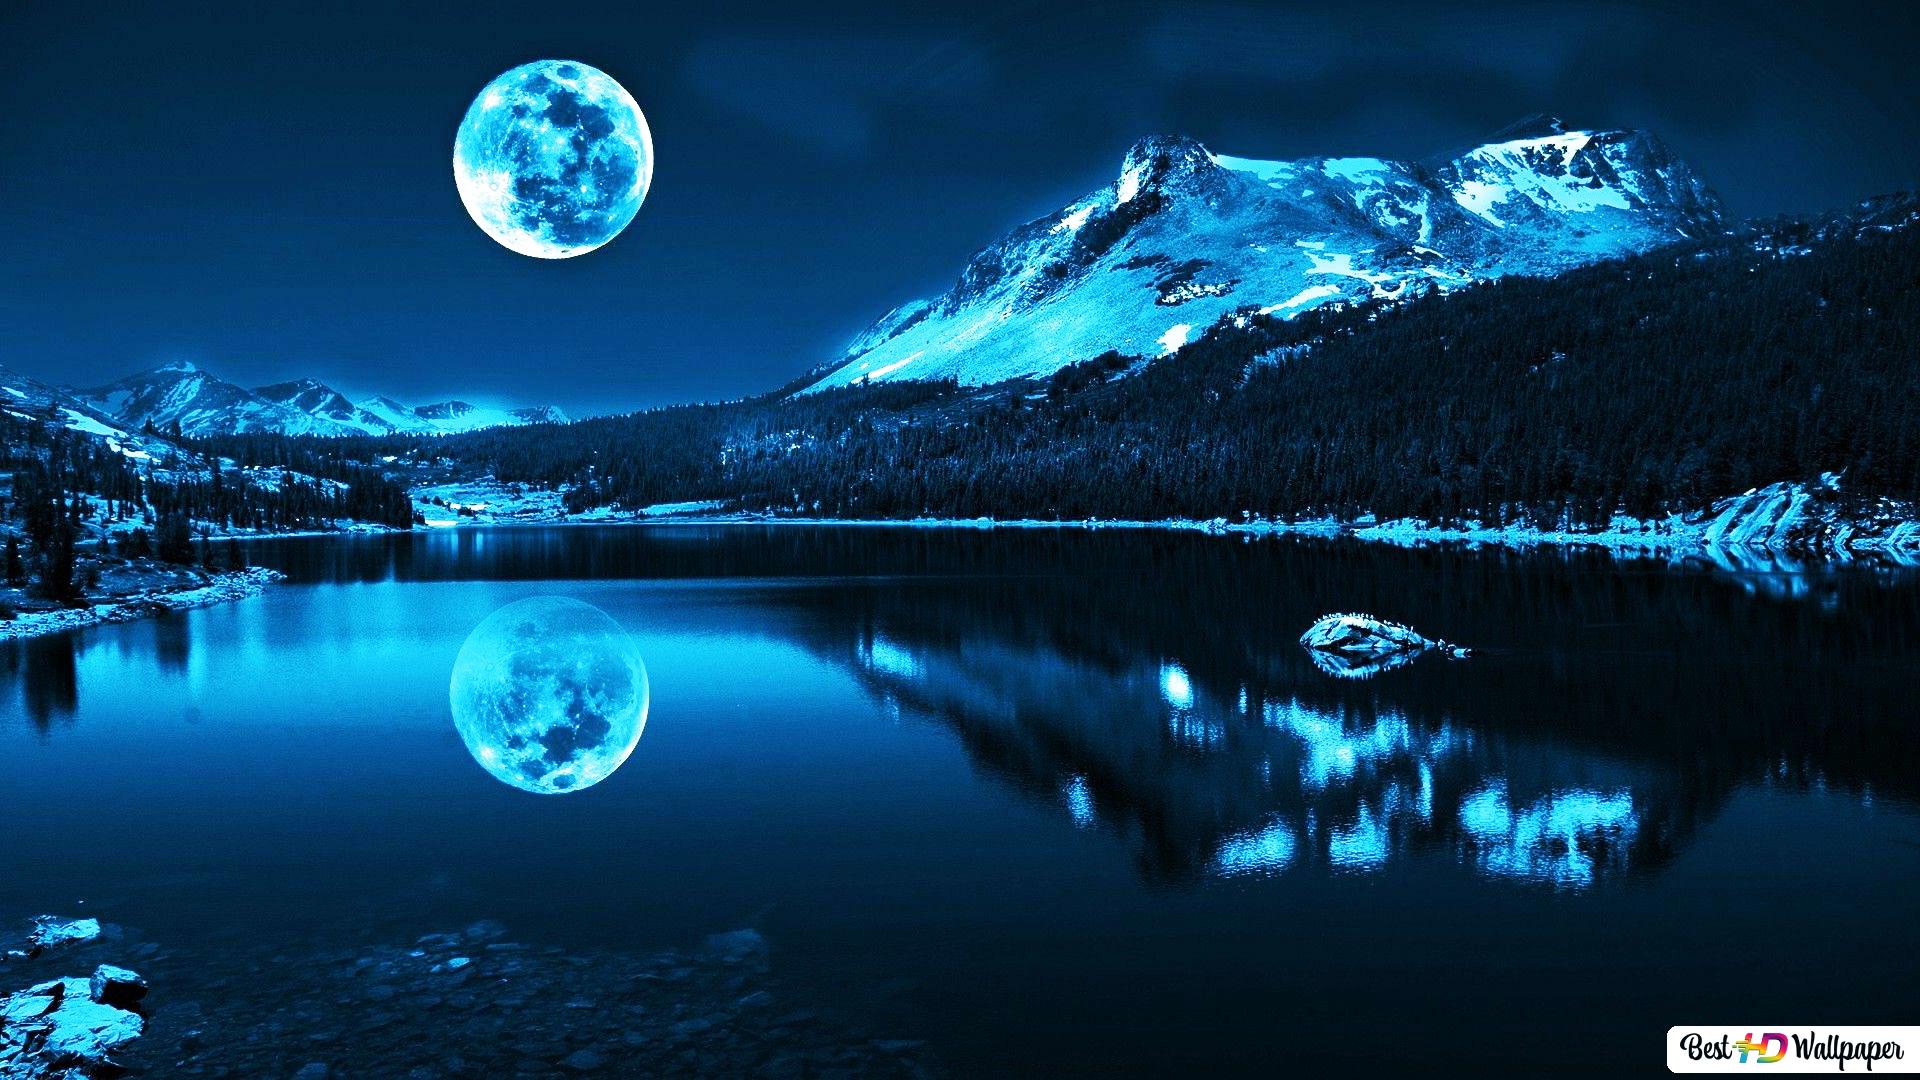 Great view of the night HD wallpaper download